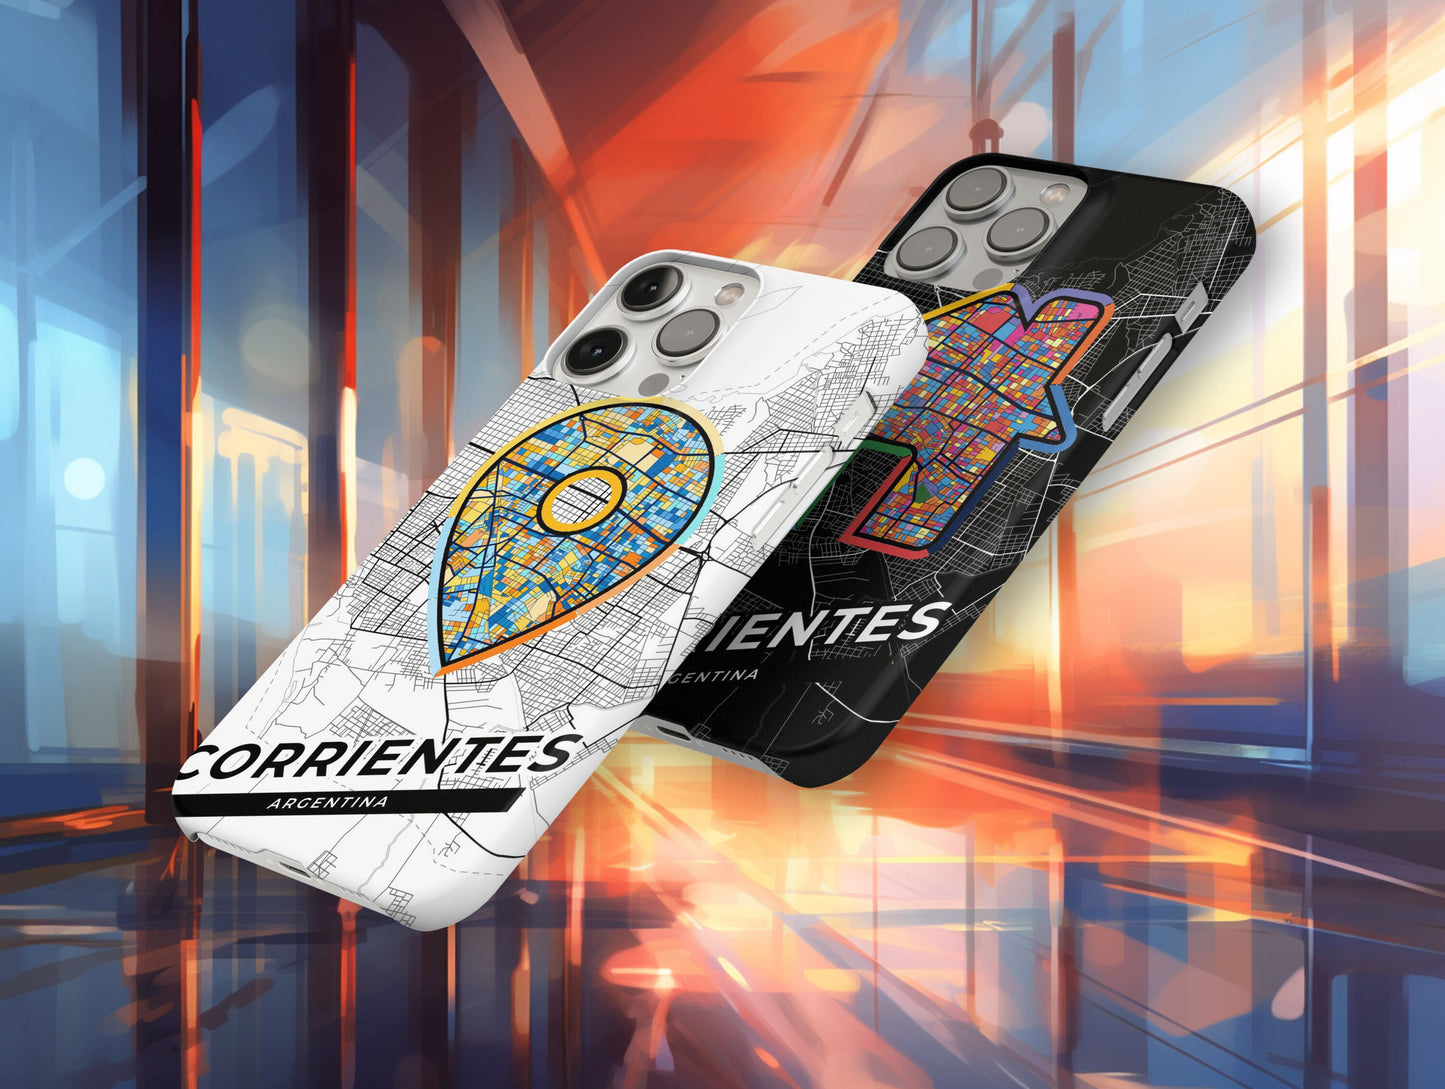 Corrientes Argentina slim phone case with colorful icon. Birthday, wedding or housewarming gift. Couple match cases.